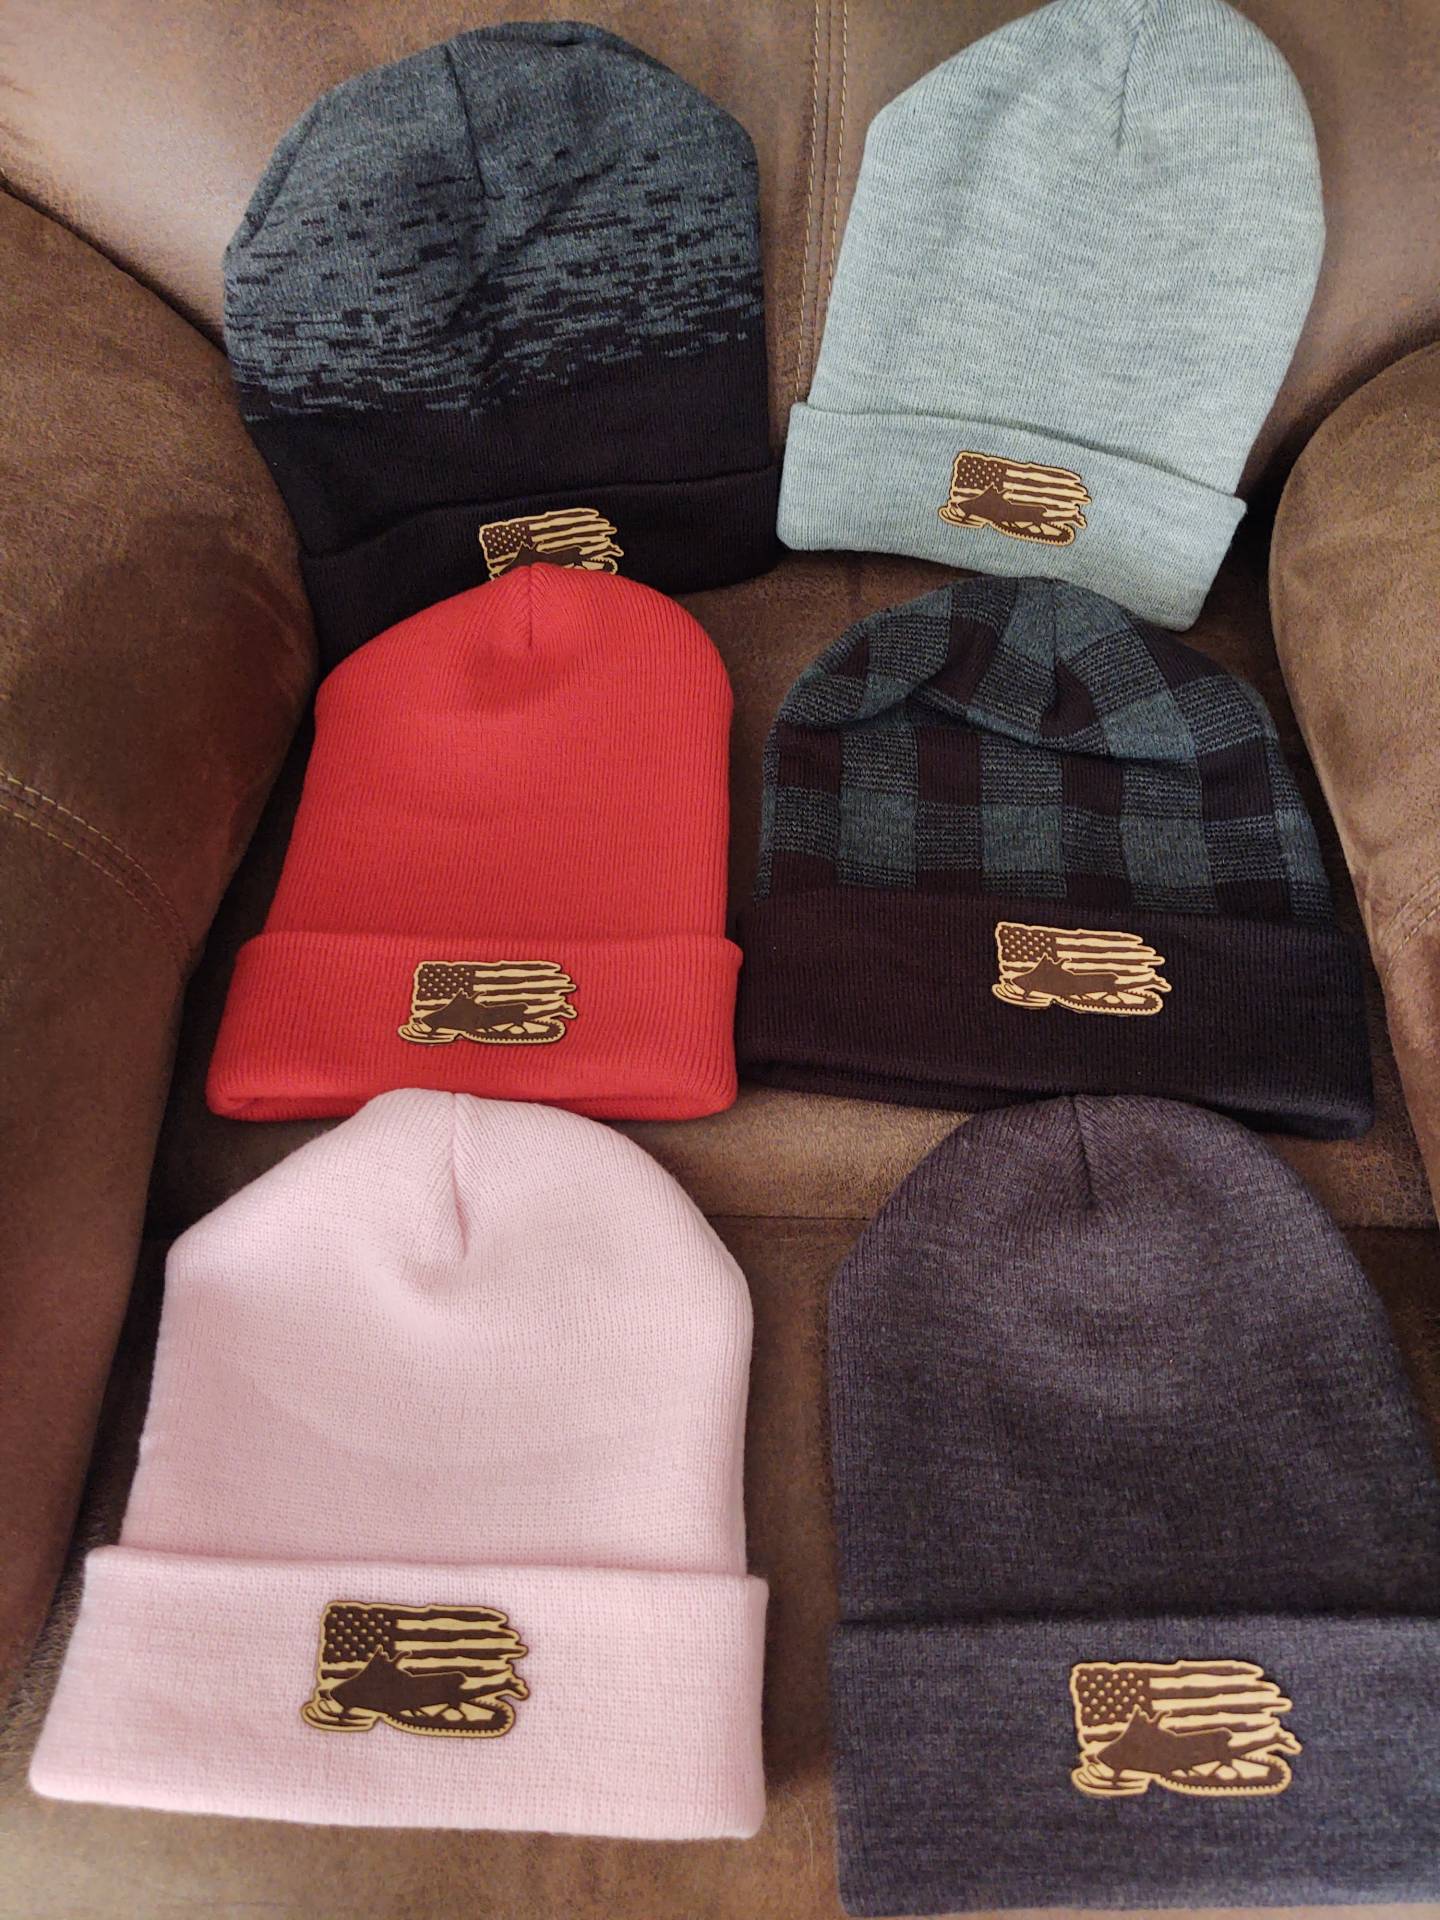 Winter Beanie hats featuring American flag & Snowmobile - Hutch Leather  Works